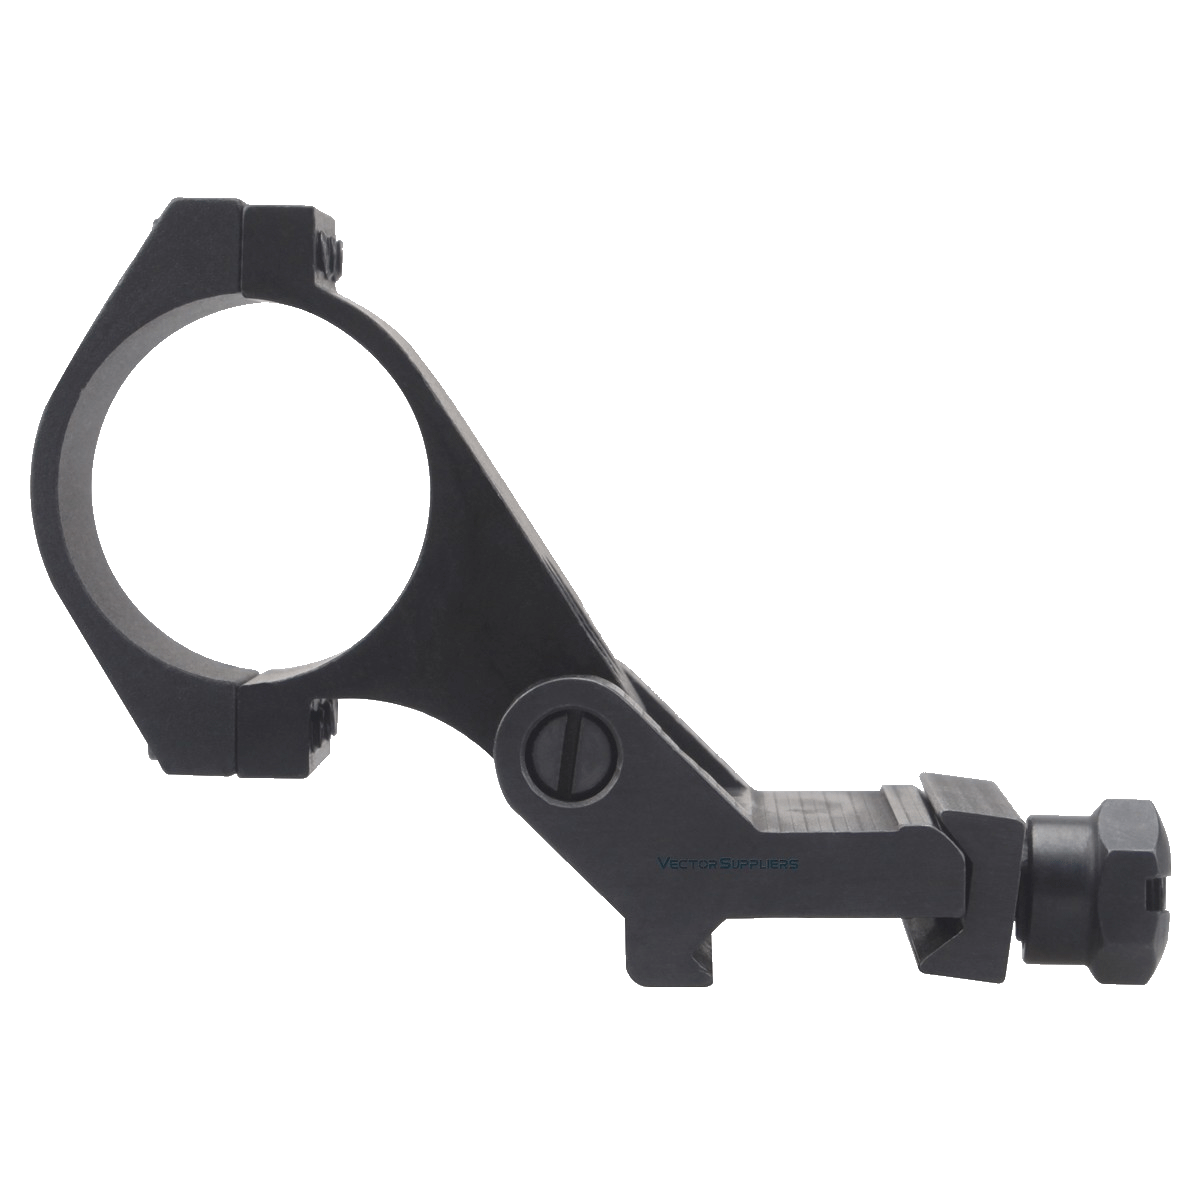 3x Magnifier with Steel Mount 